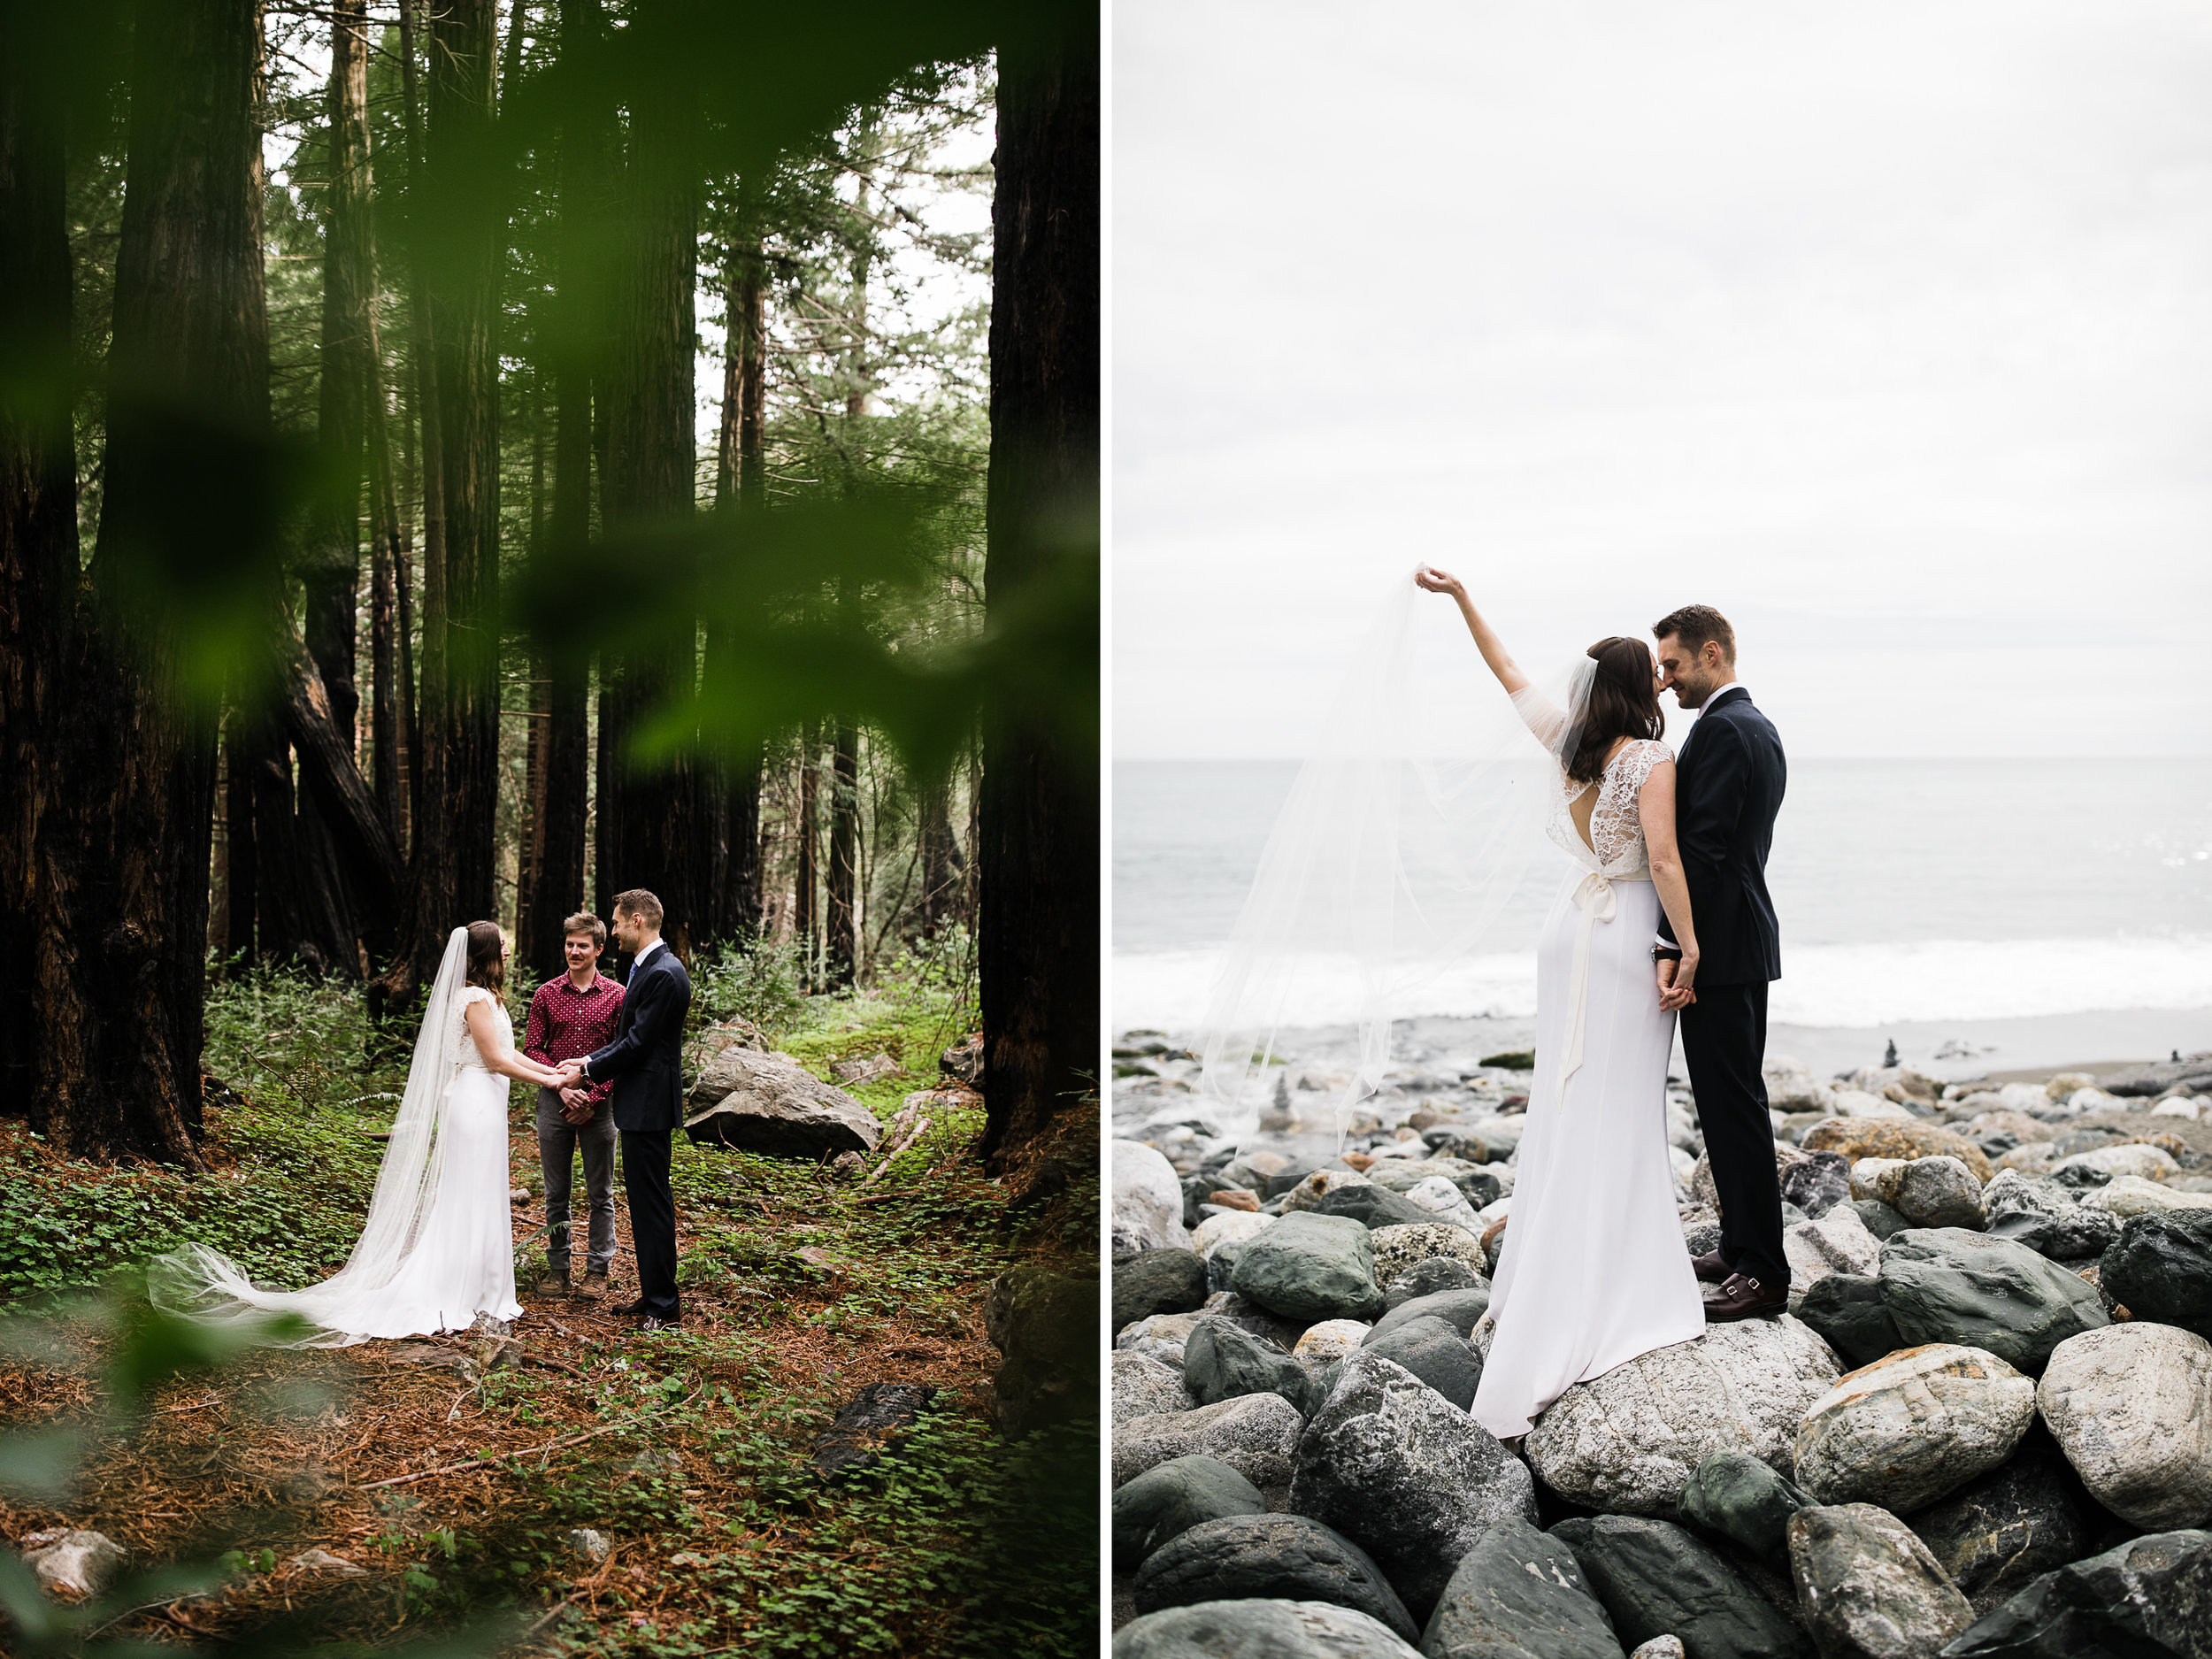 Spring elopement in the redwoods of Big Sur, California | The Hearnes Adventure Wedding Photography